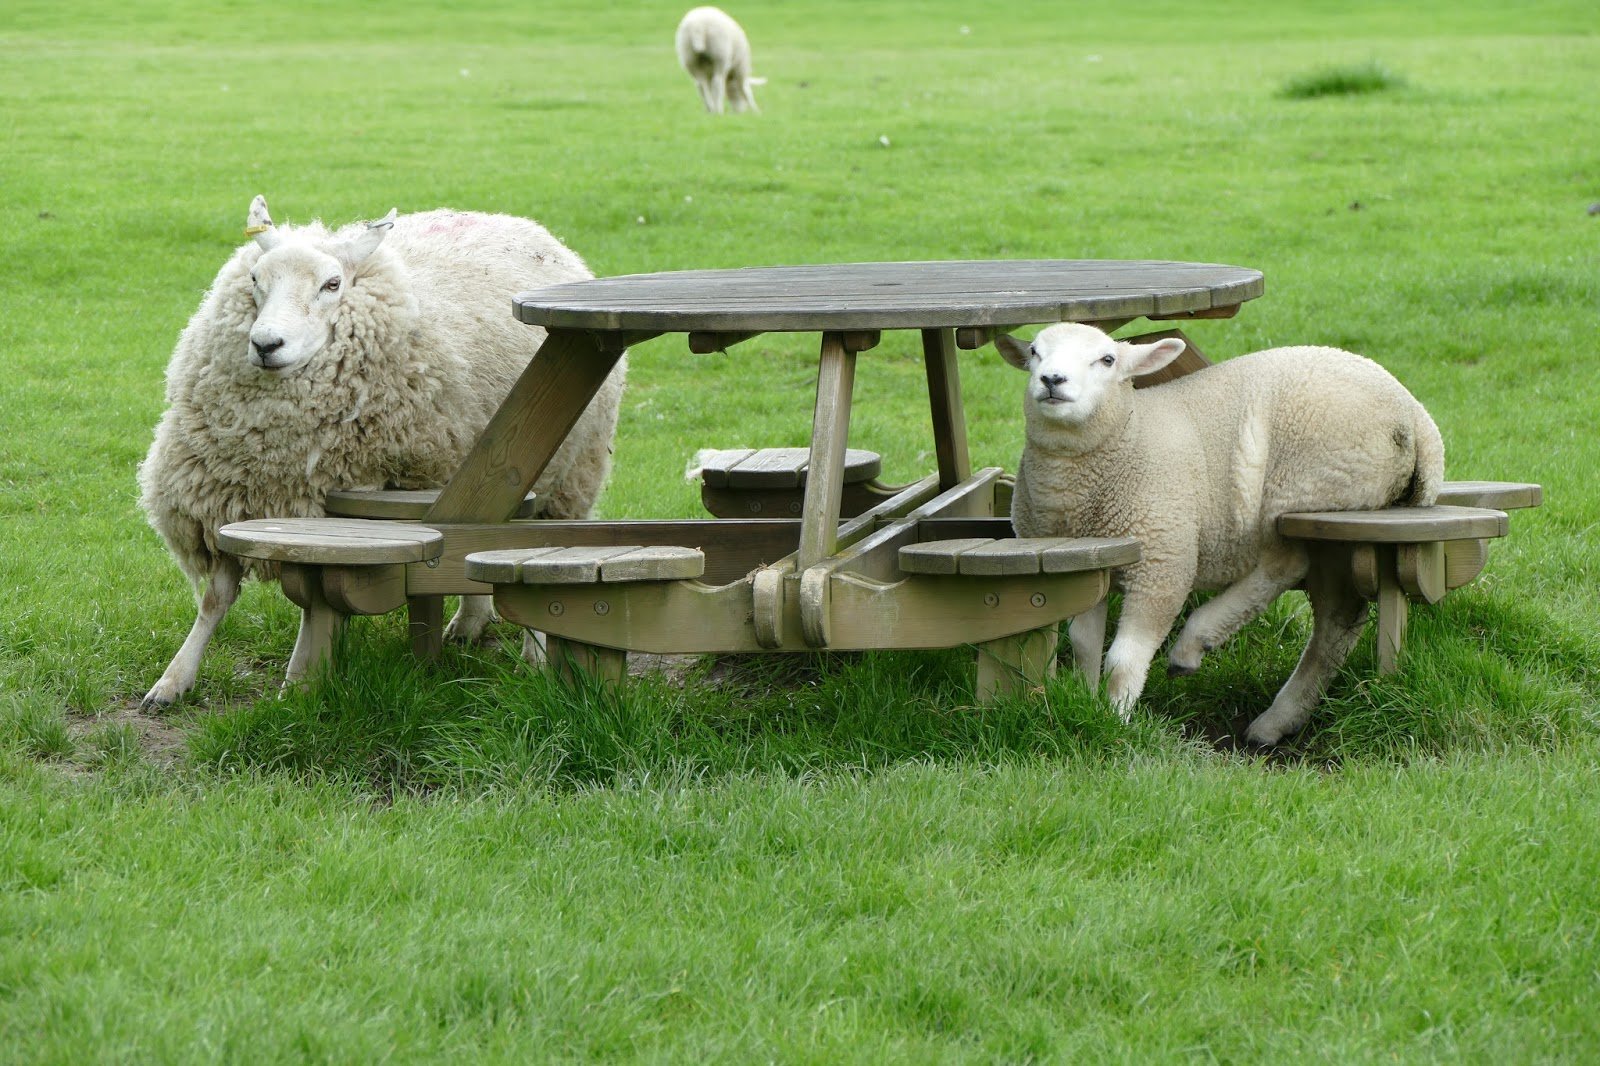 Sheep in a field around a picnic bench